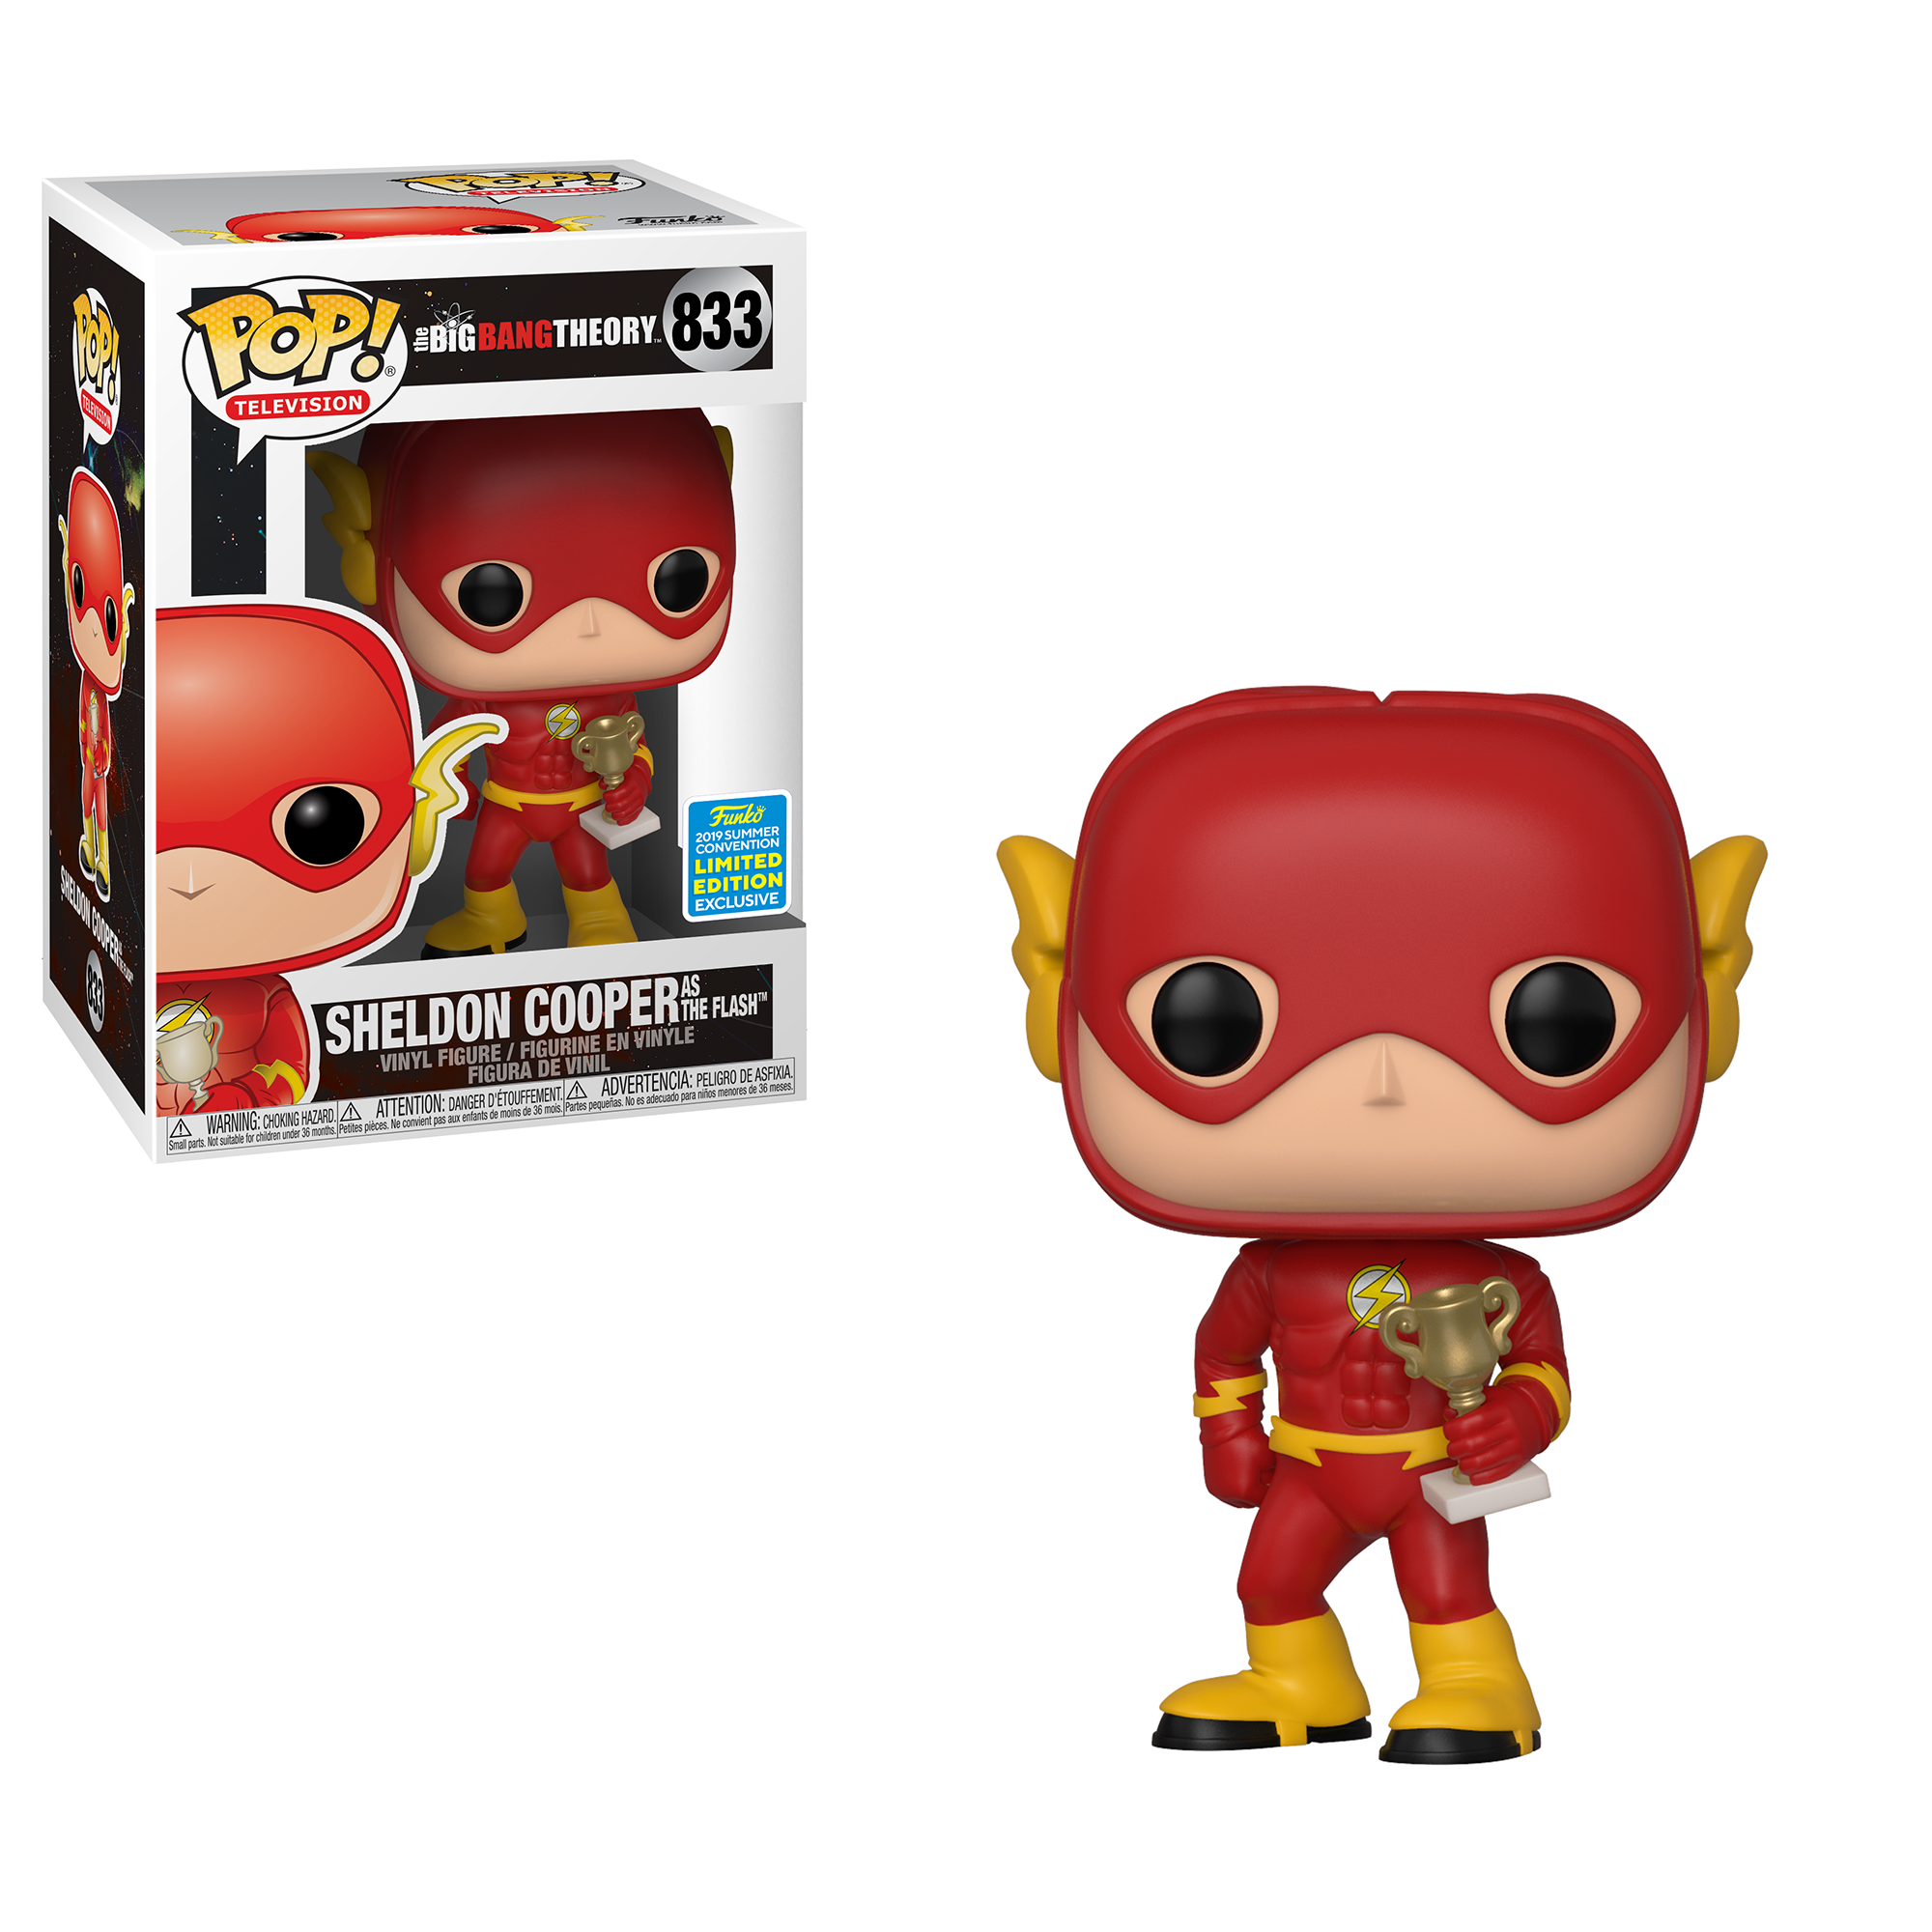 Funko POP TV: Big Bang Theory - Sheldon as Flash (Justice League Halloween) - Summer Convention Exclusive - image 1 of 2